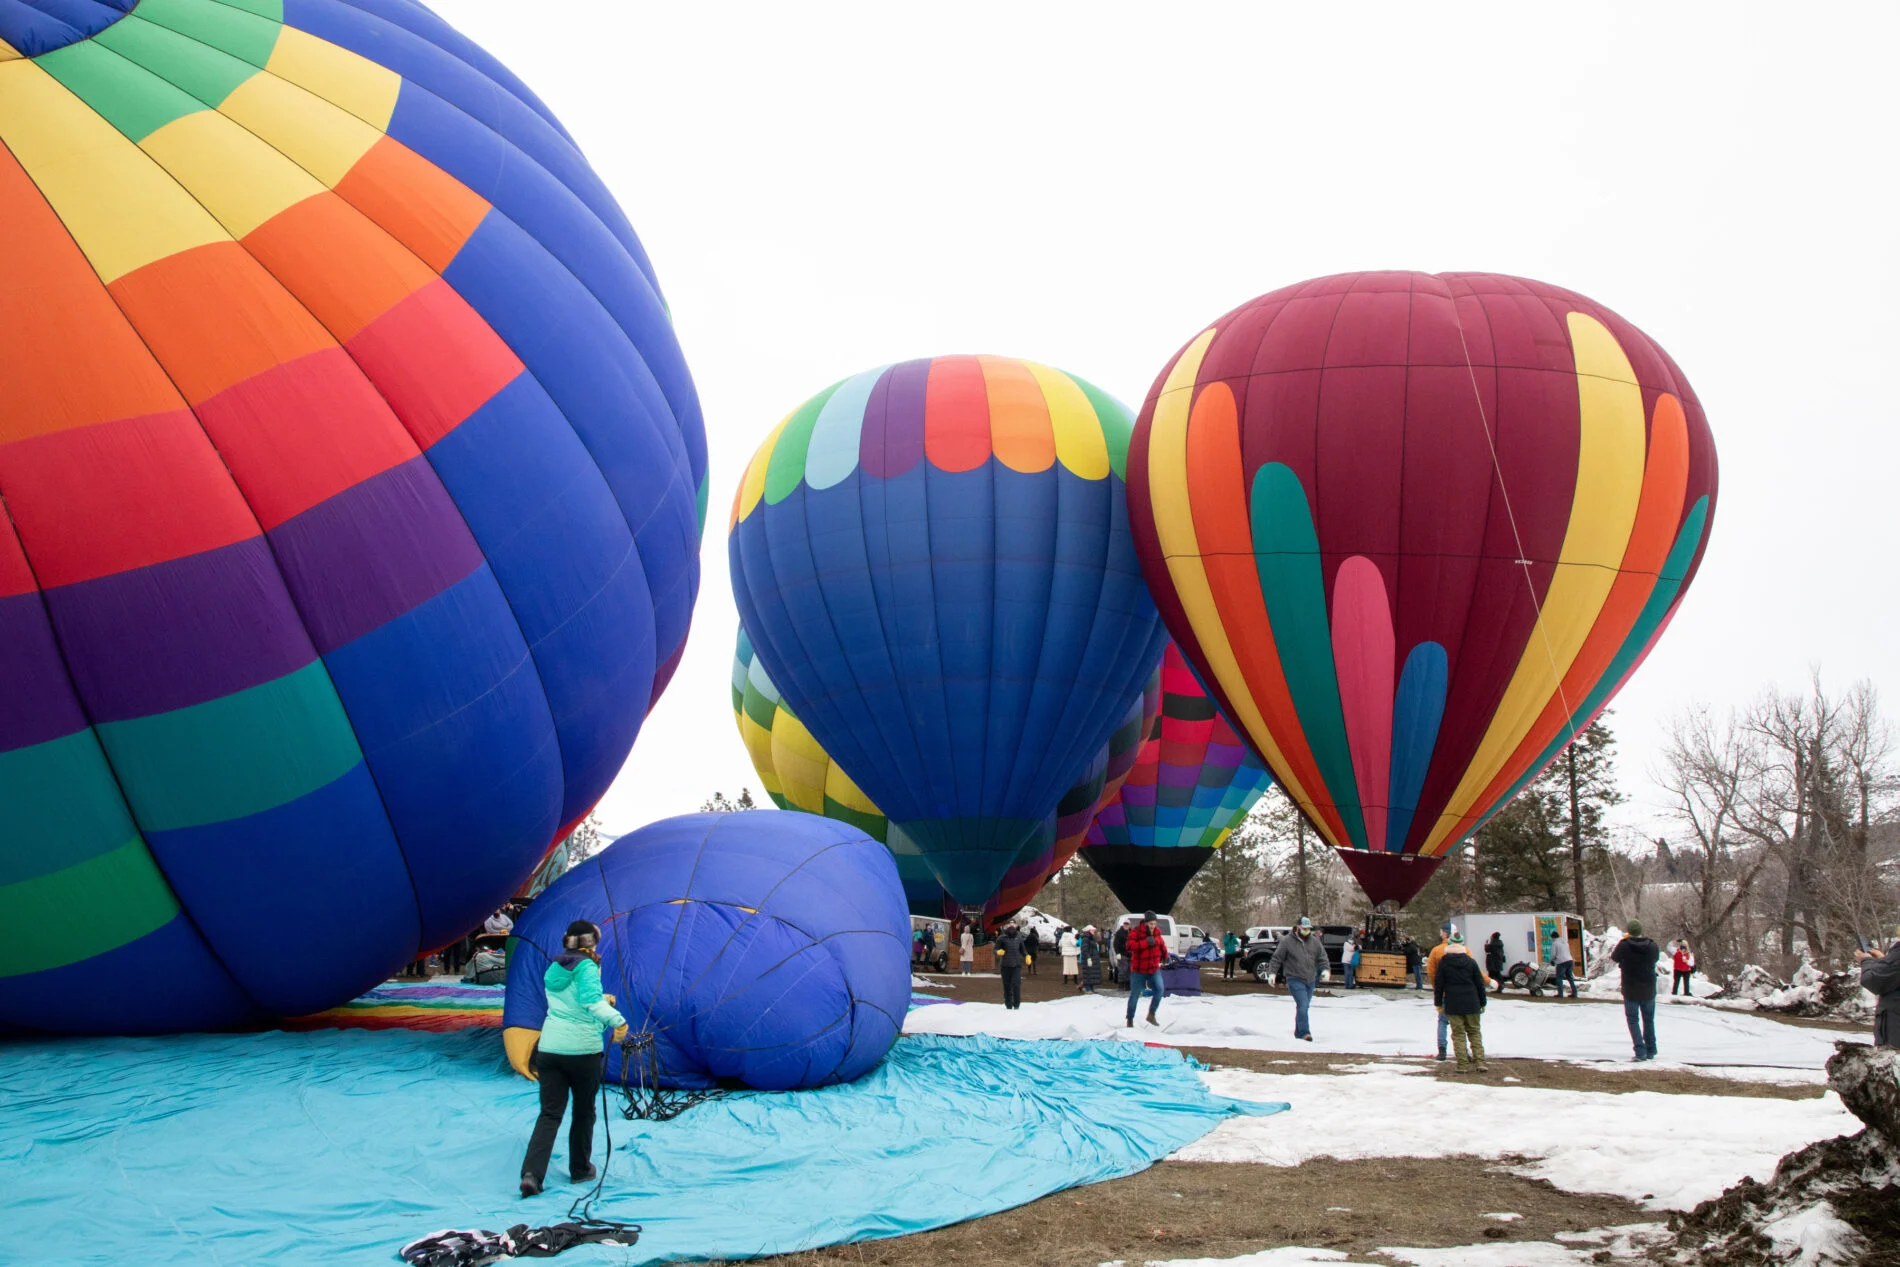 One of the best things to do in winter in Winthrop, watch the Balloon Roundup.